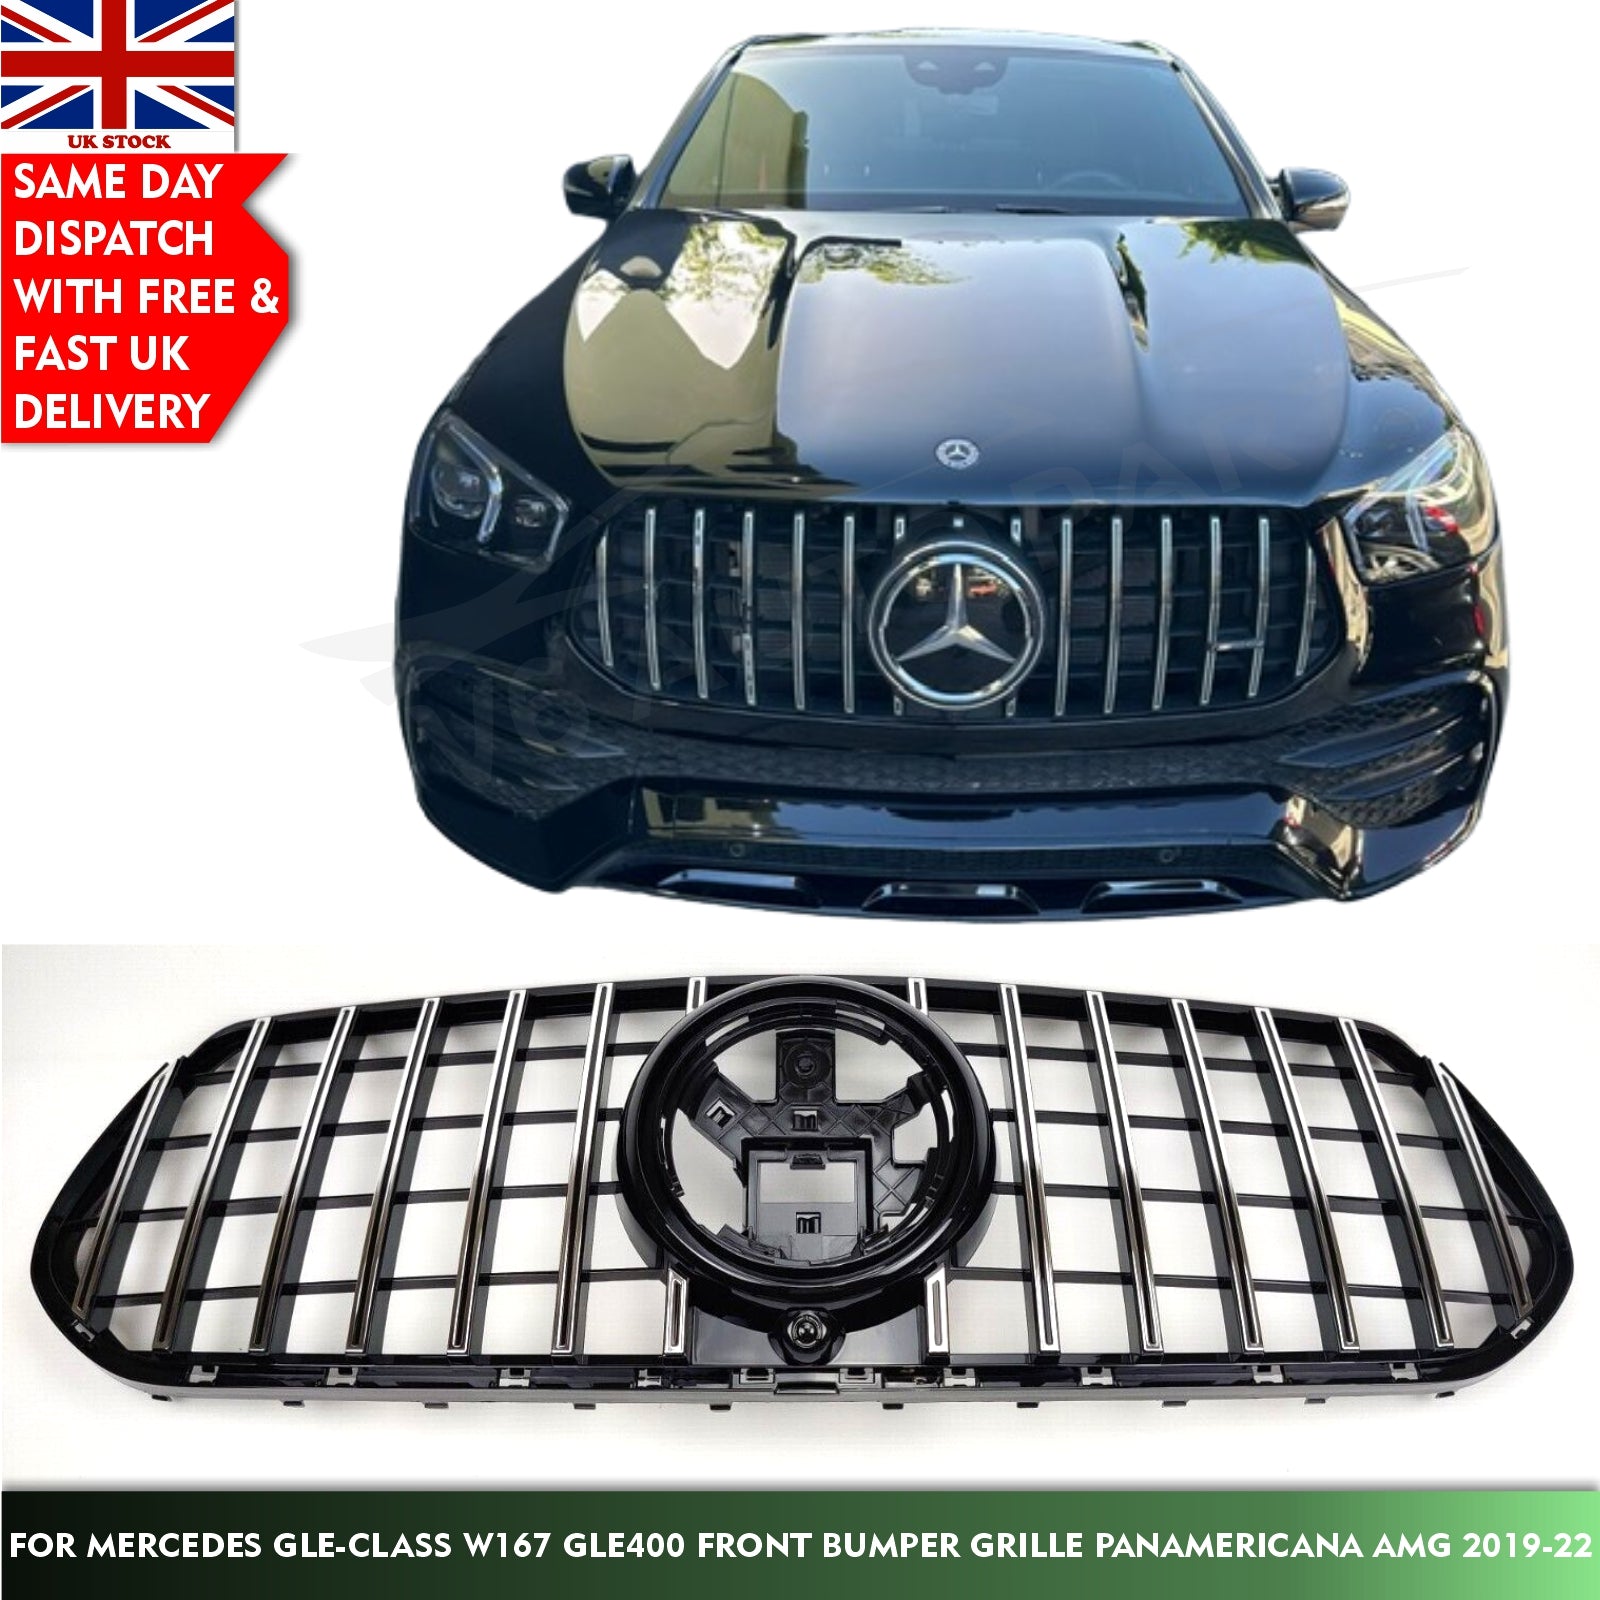 For Mercedes GLE-Class W167 GLE400 Grill Front Bumper Grille Panamericana AMG 2019-2022